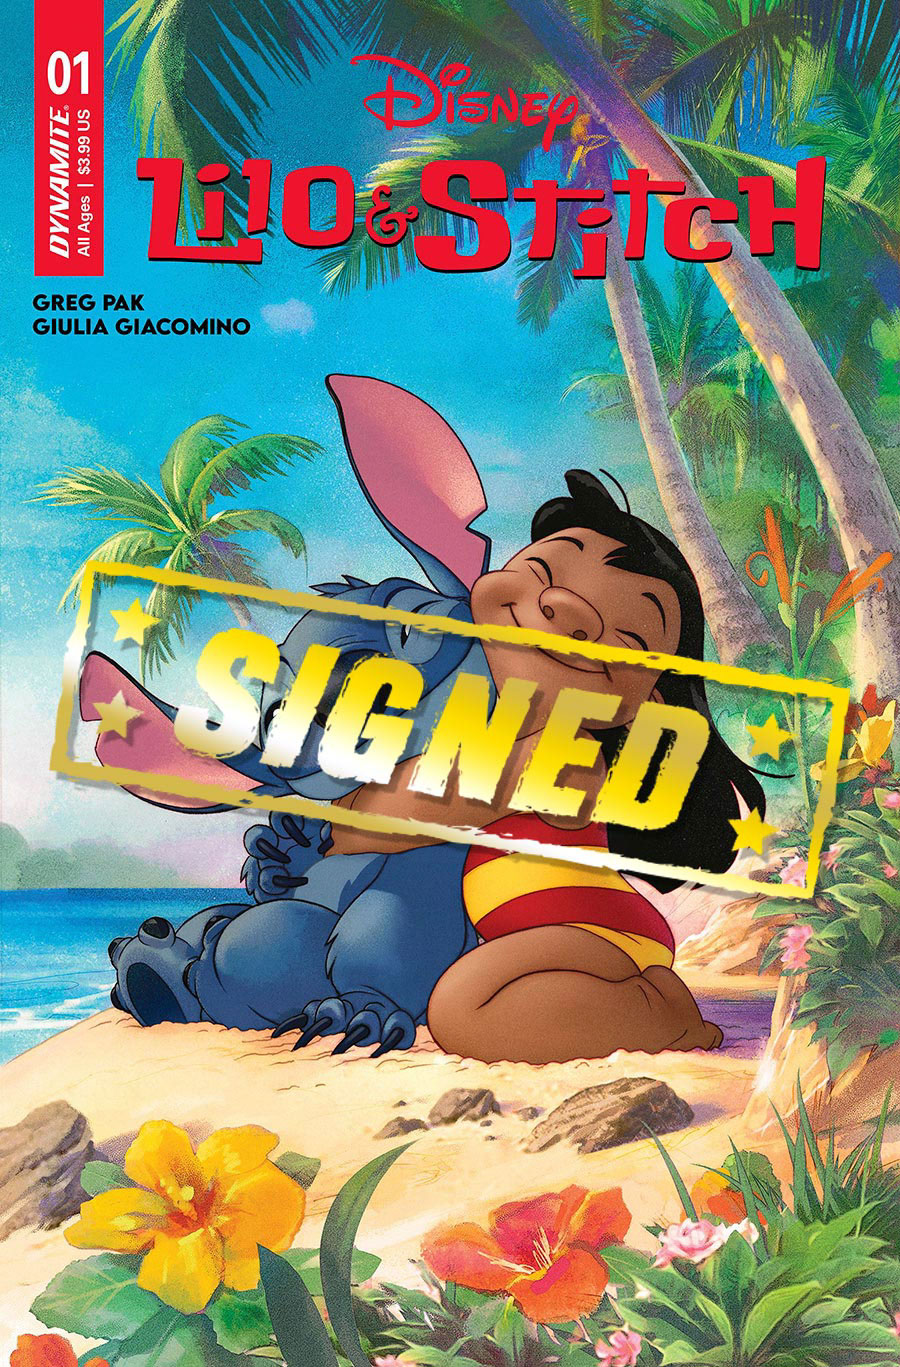 Lilo & Stitch #1 Cover W Variant Joshua Middleton Foil Cover Signed By Greg Pak Moana McAdams & Nathan Cosby